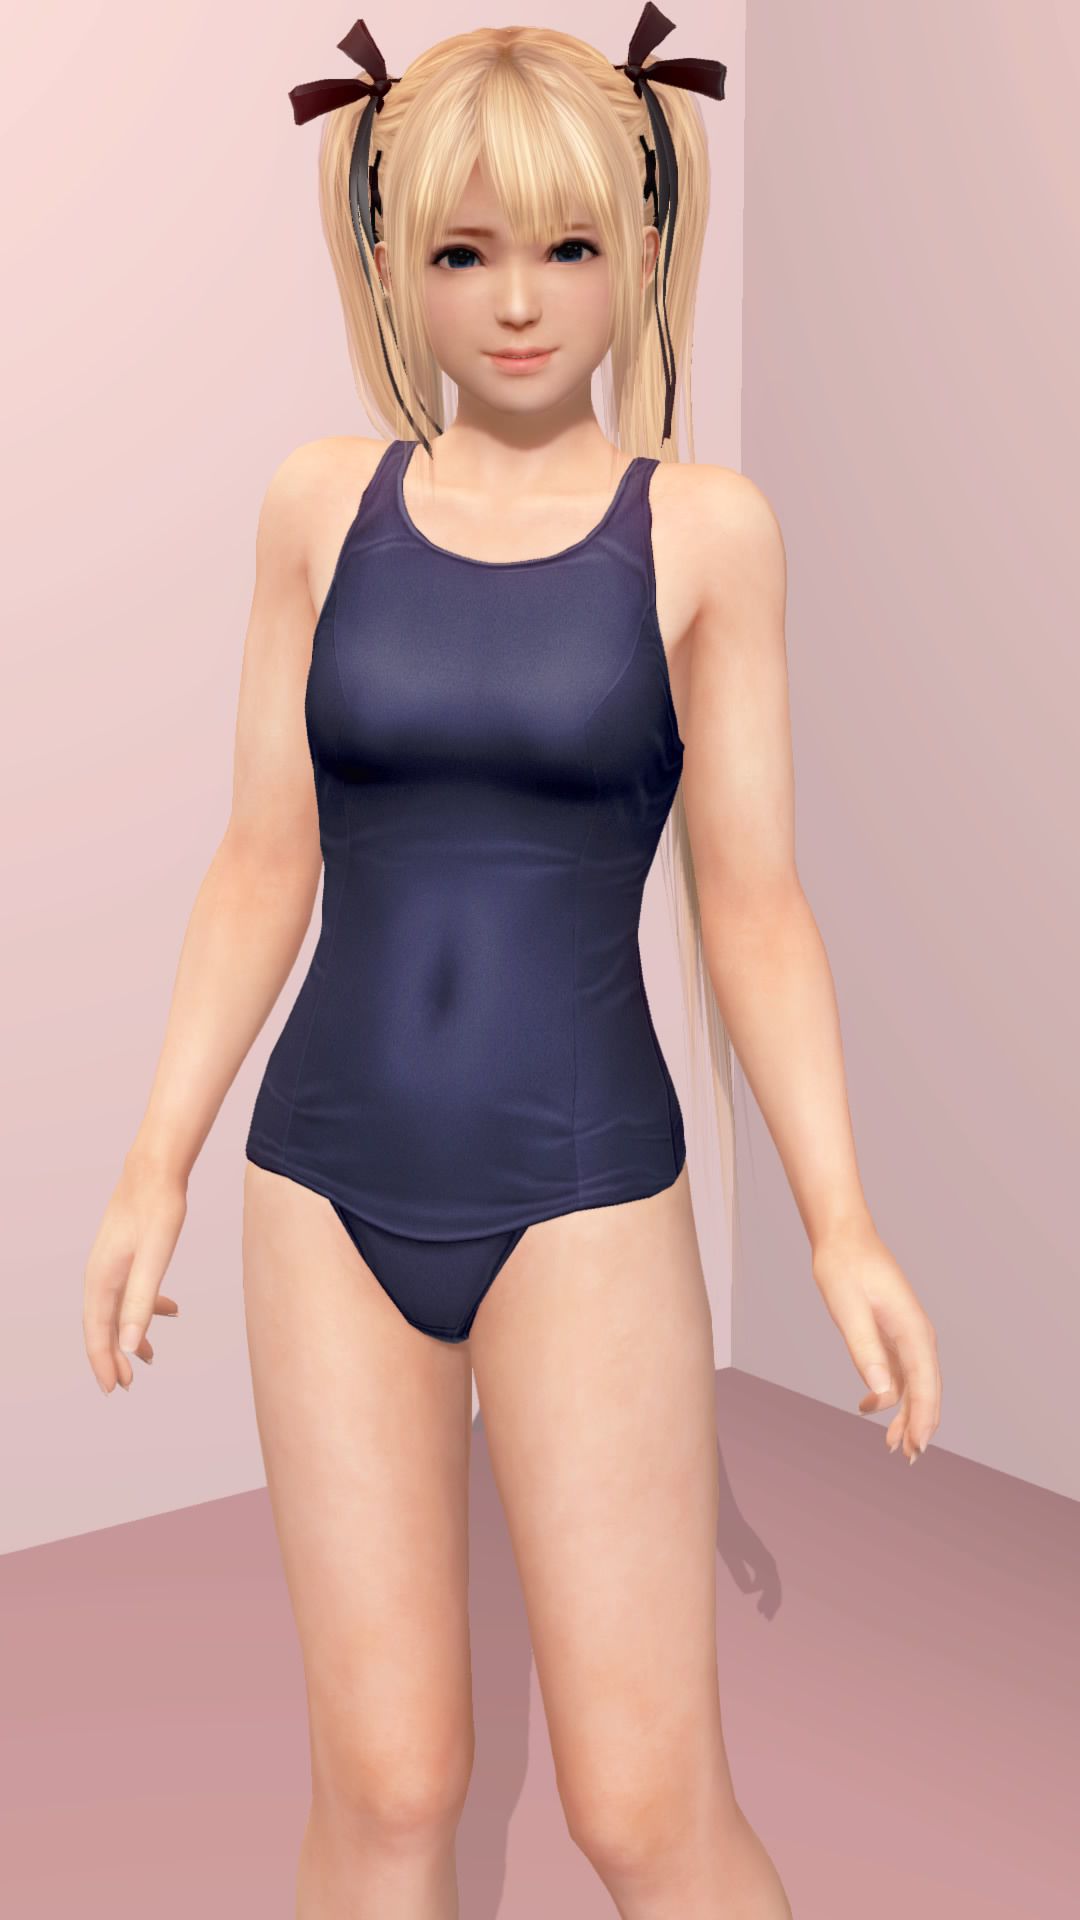 DOAX3 recommend private shooting Association (Division of Rose-Marie) in swimsuit 21